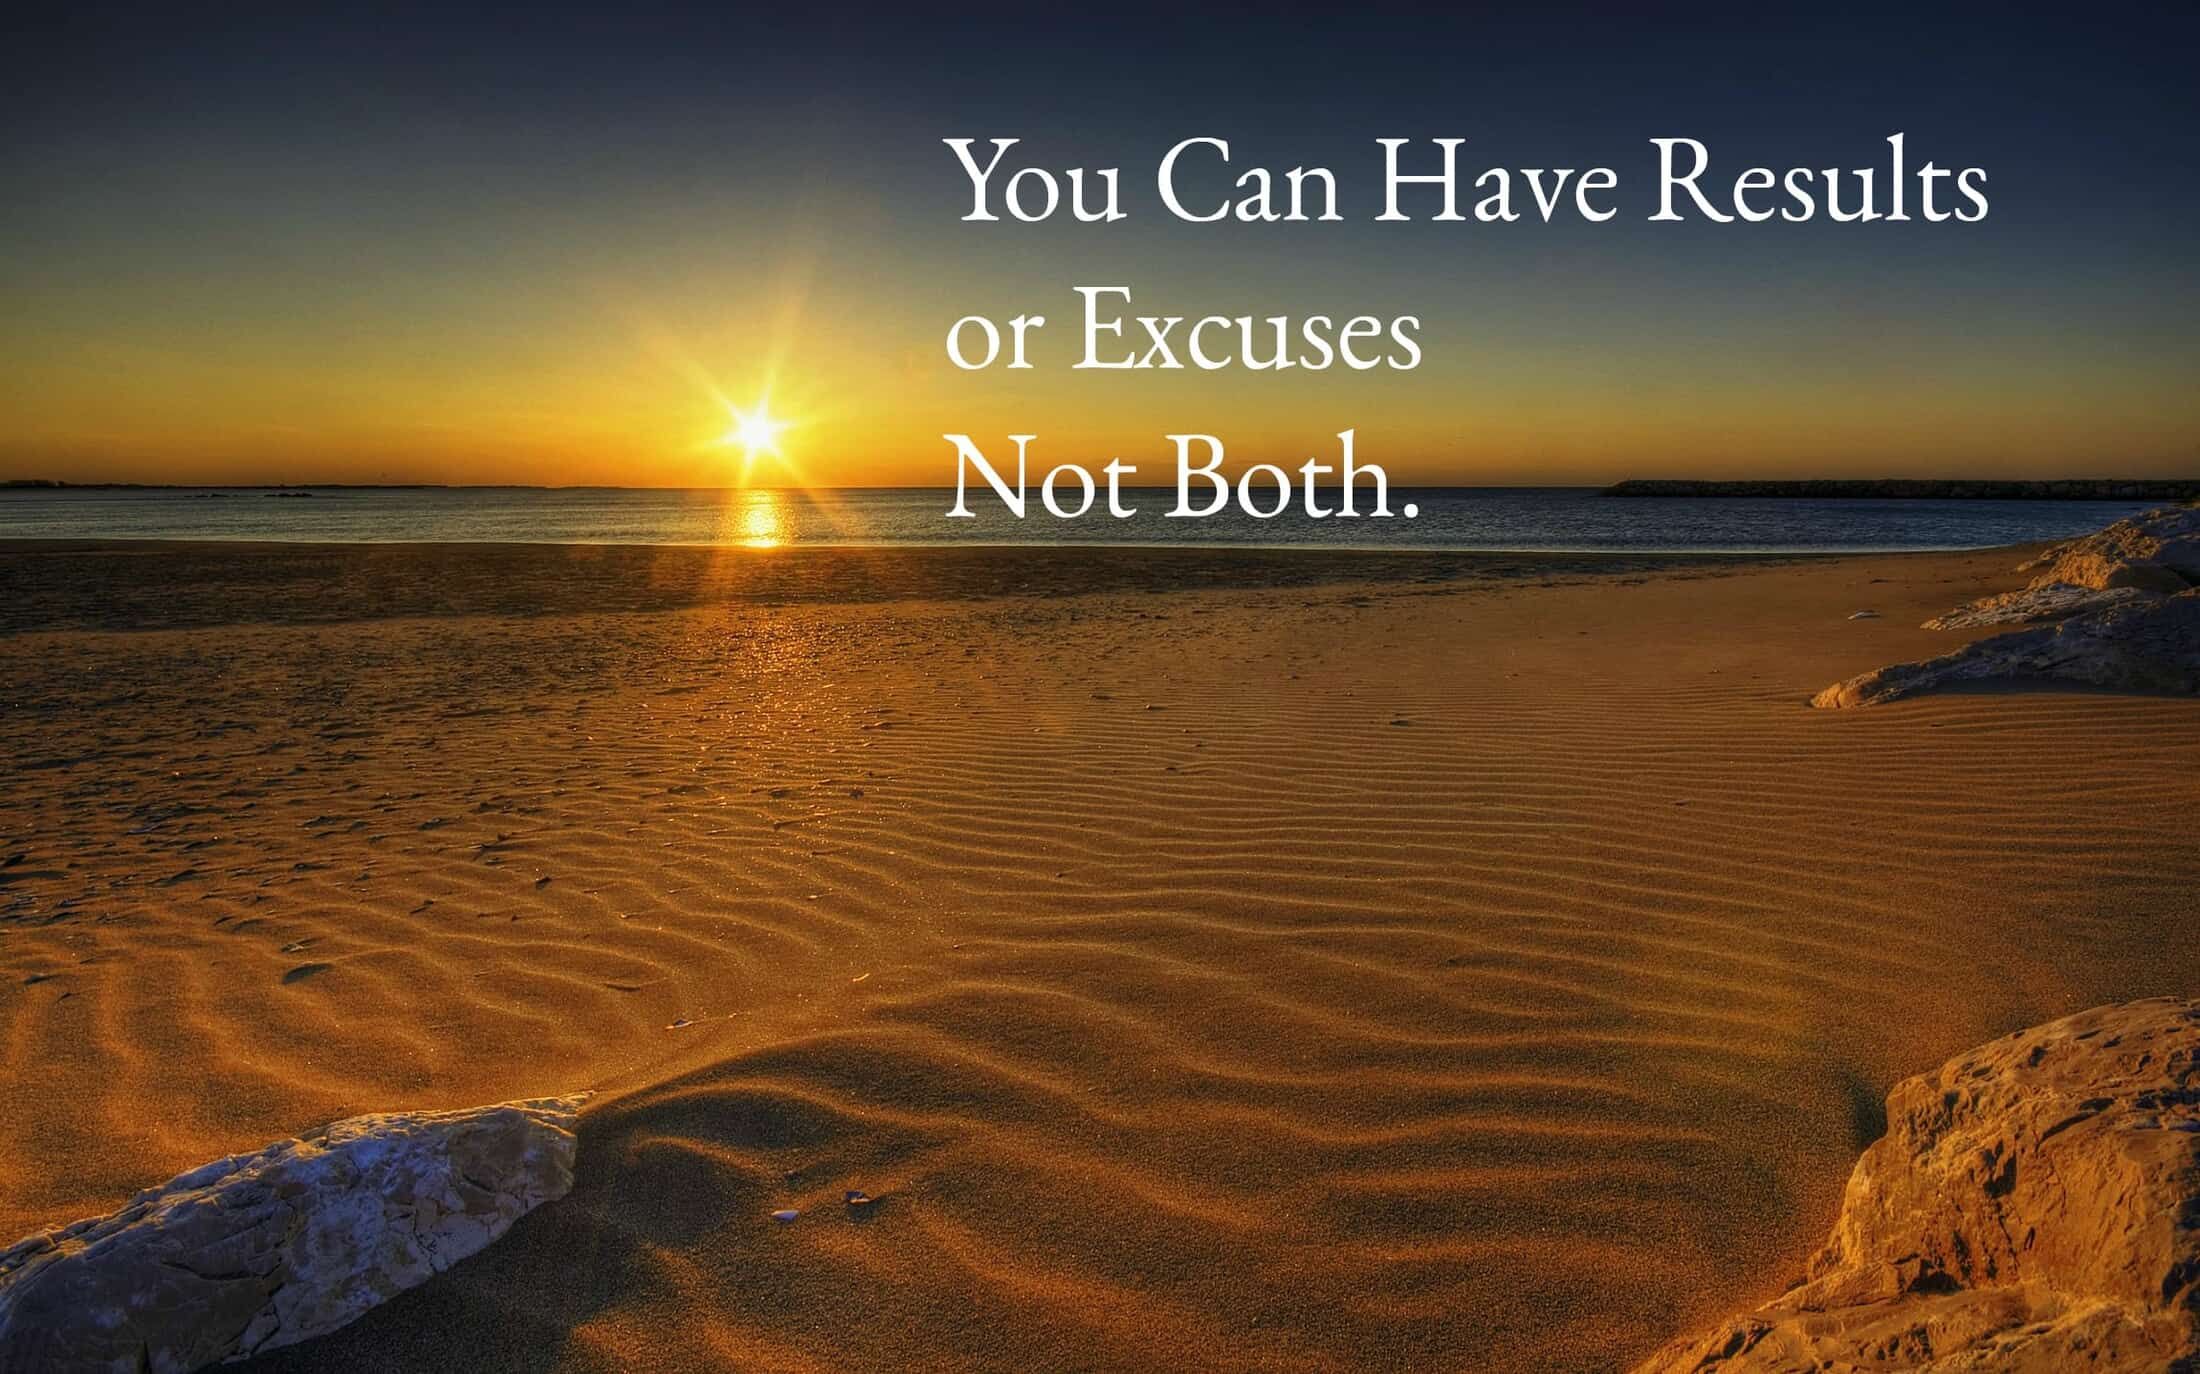 Image of a beach with an overlay "you can have results or excuses not both."